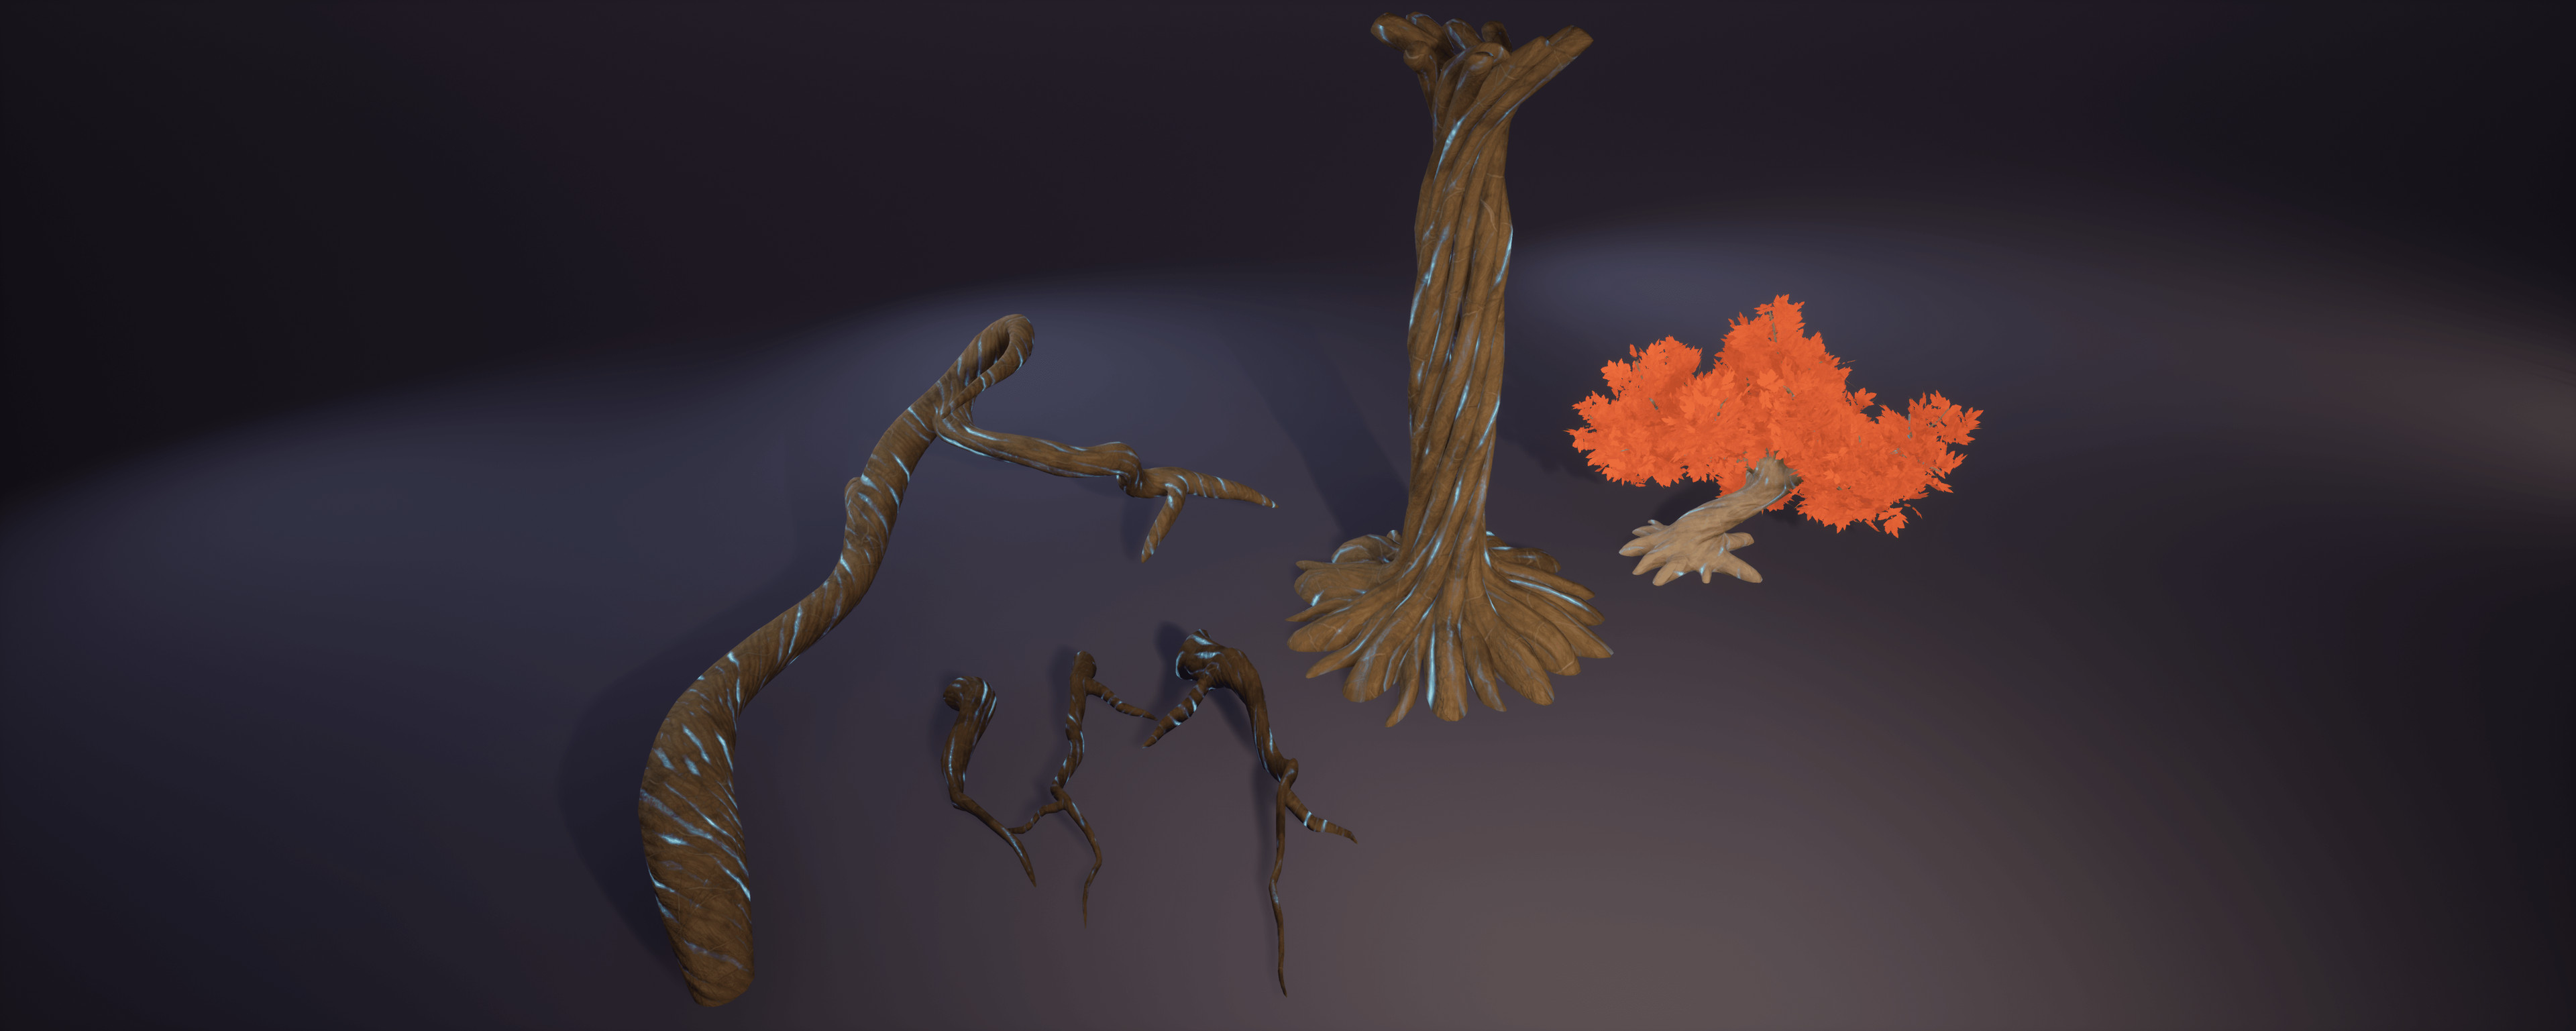 Display of my roots and tree asset.